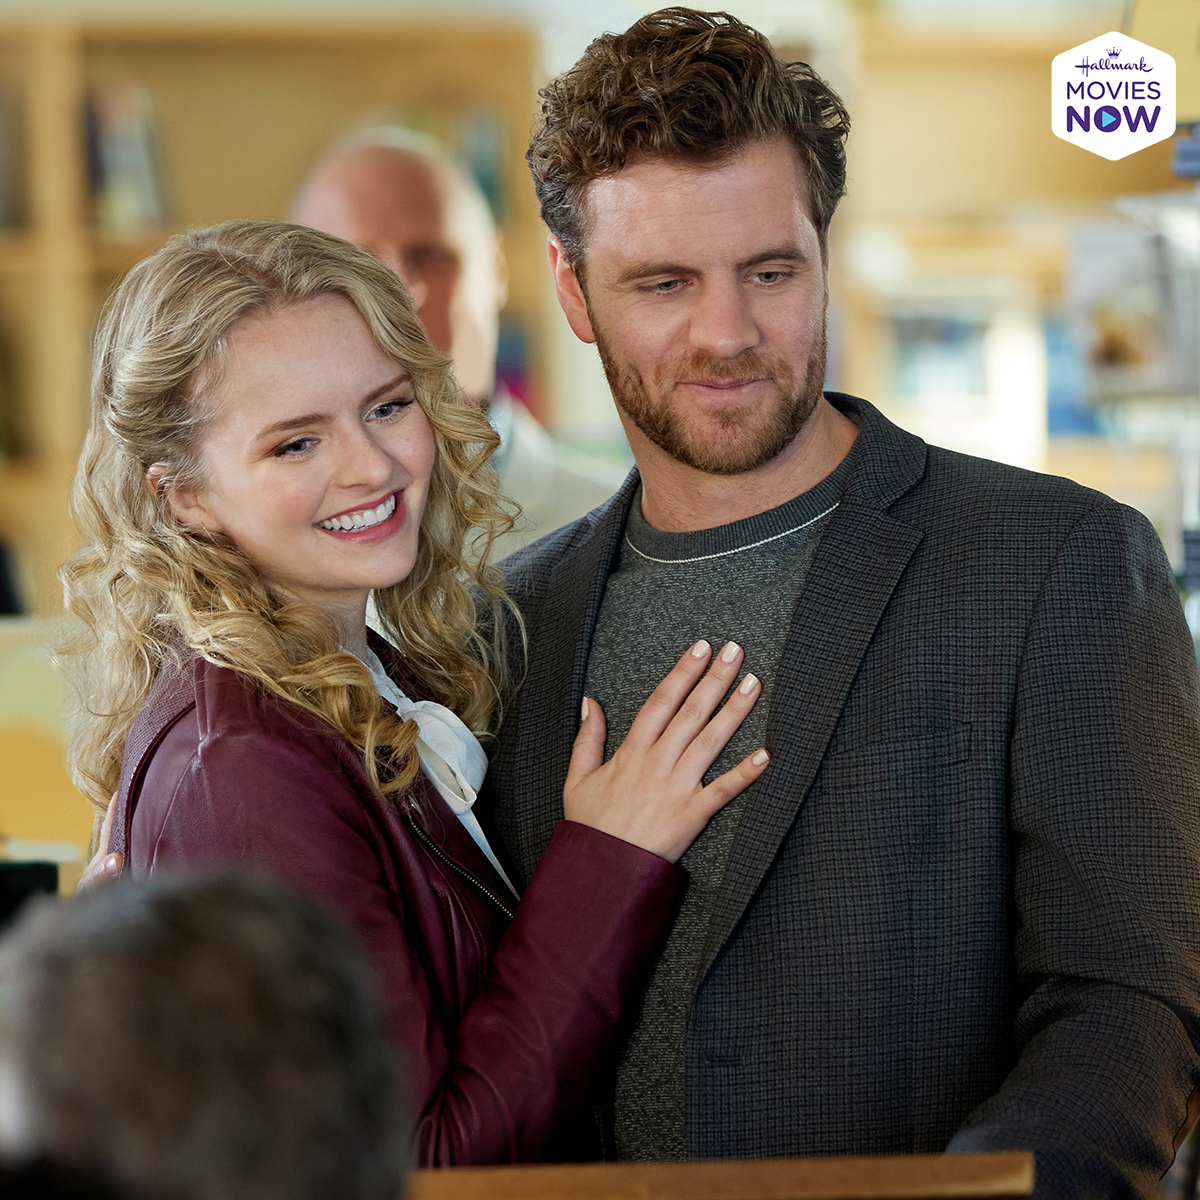 It's never too late to reconnect with a lost love, or to forge a new one! Stream #ALifelongLove starring @AndreaKBrooks and @patch_may on #HallmarkMoviesNow! #Hearties